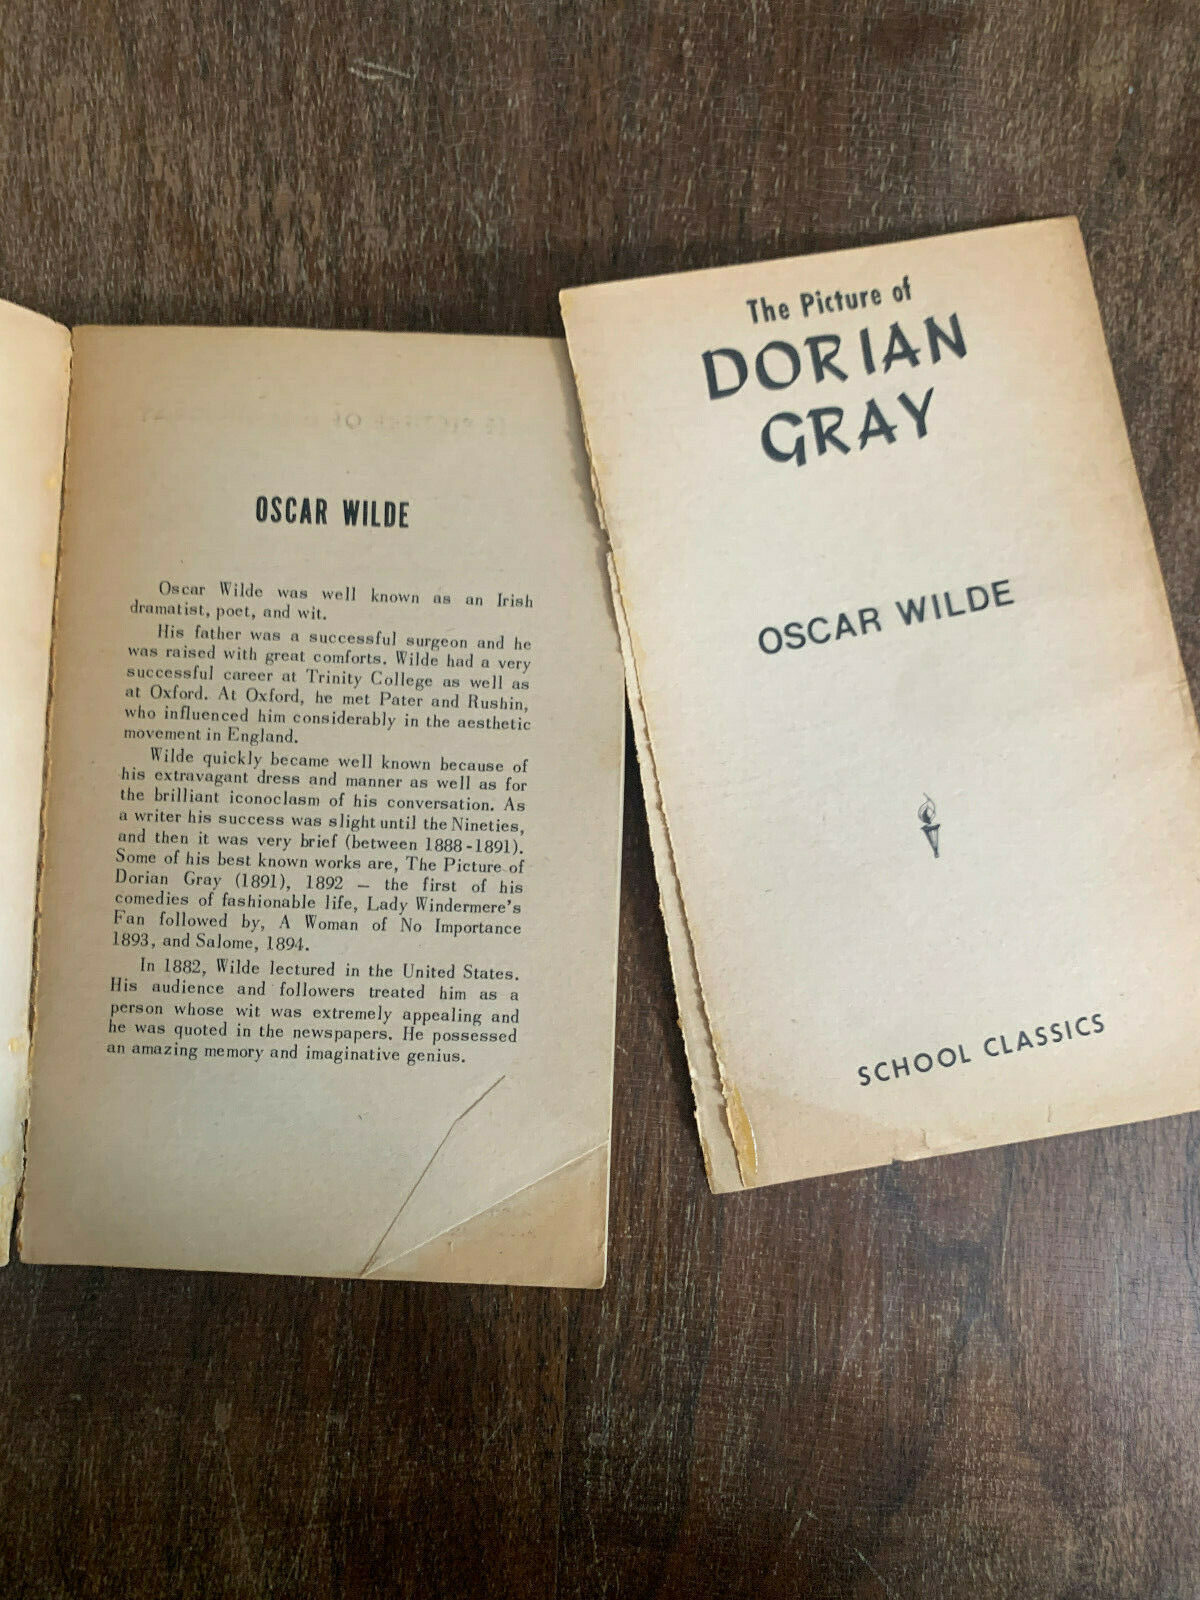 The Picture of Dorian Gray by Oscar Wilde, School Classics Series 1965 PB (4A)